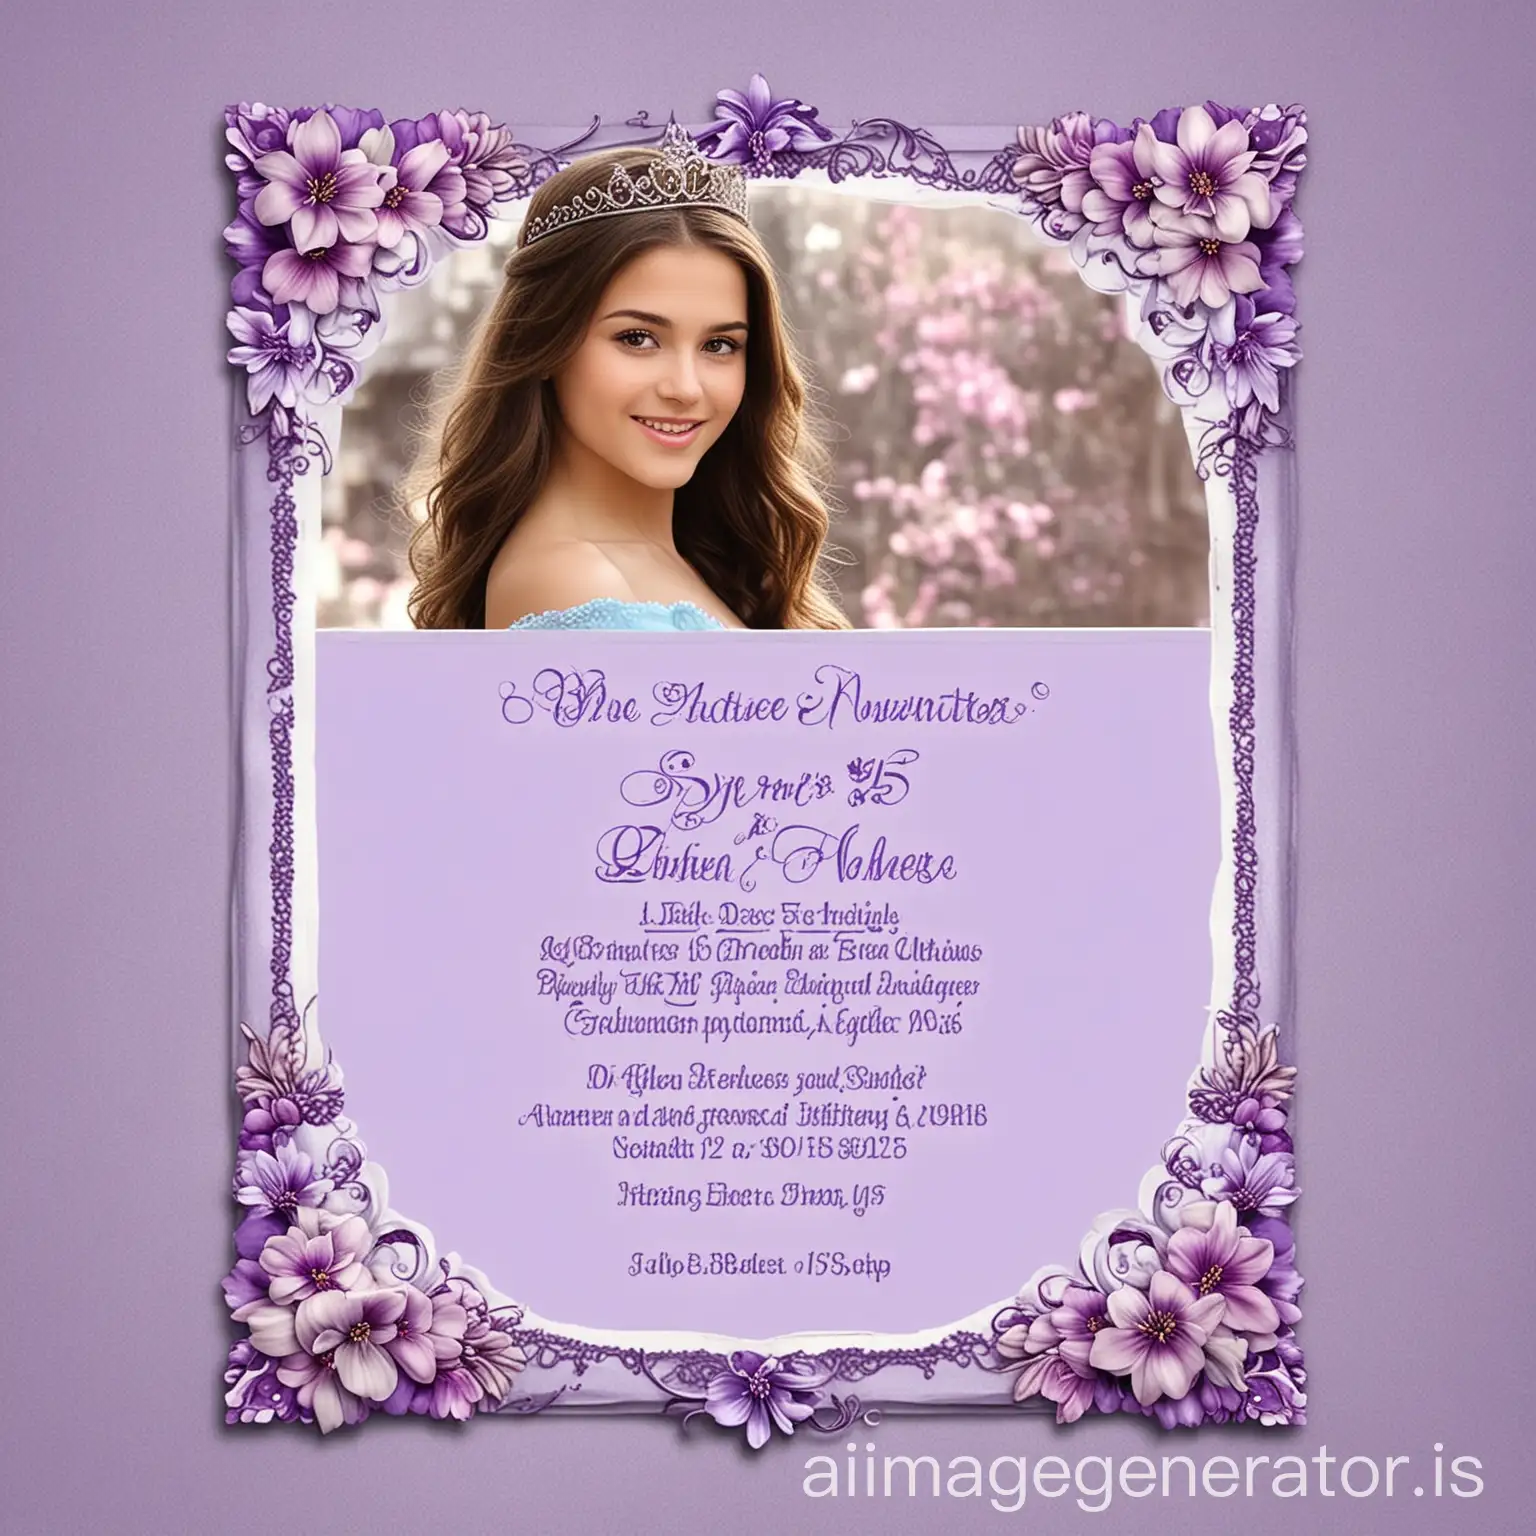 Sky-Blue-and-Purple-Sweet-15-Invitation-with-Realistic-Brunette-Princess-and-Floral-Borders